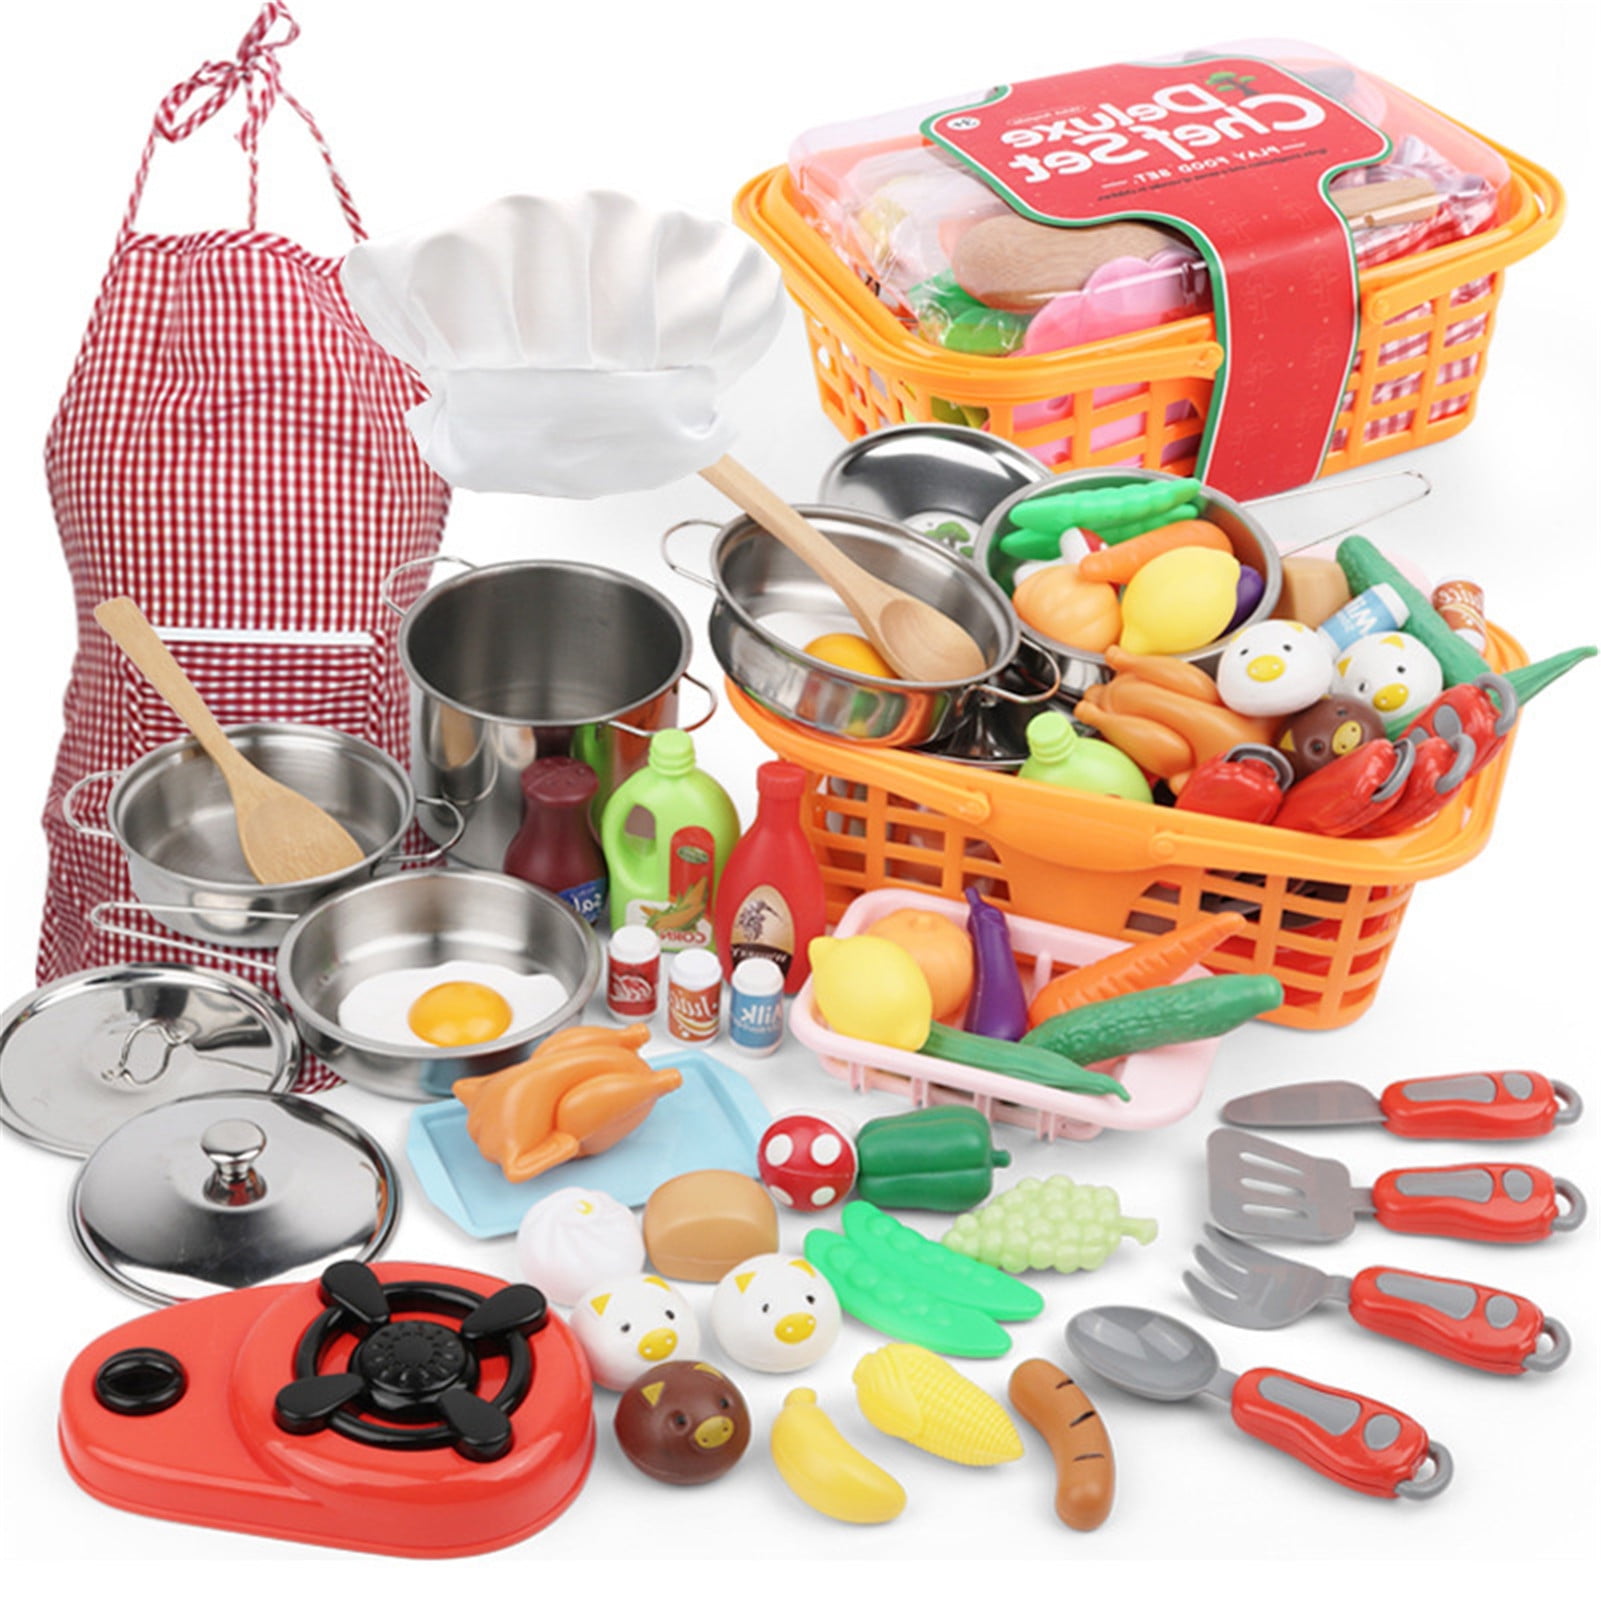 Play Food Sets for Kids Kitchen, Play Kitchen Accessories 46Pcs, Stainless  Steel Cookware Pots and Pans Set with CuteApron, Cutting Play Food, Cooking